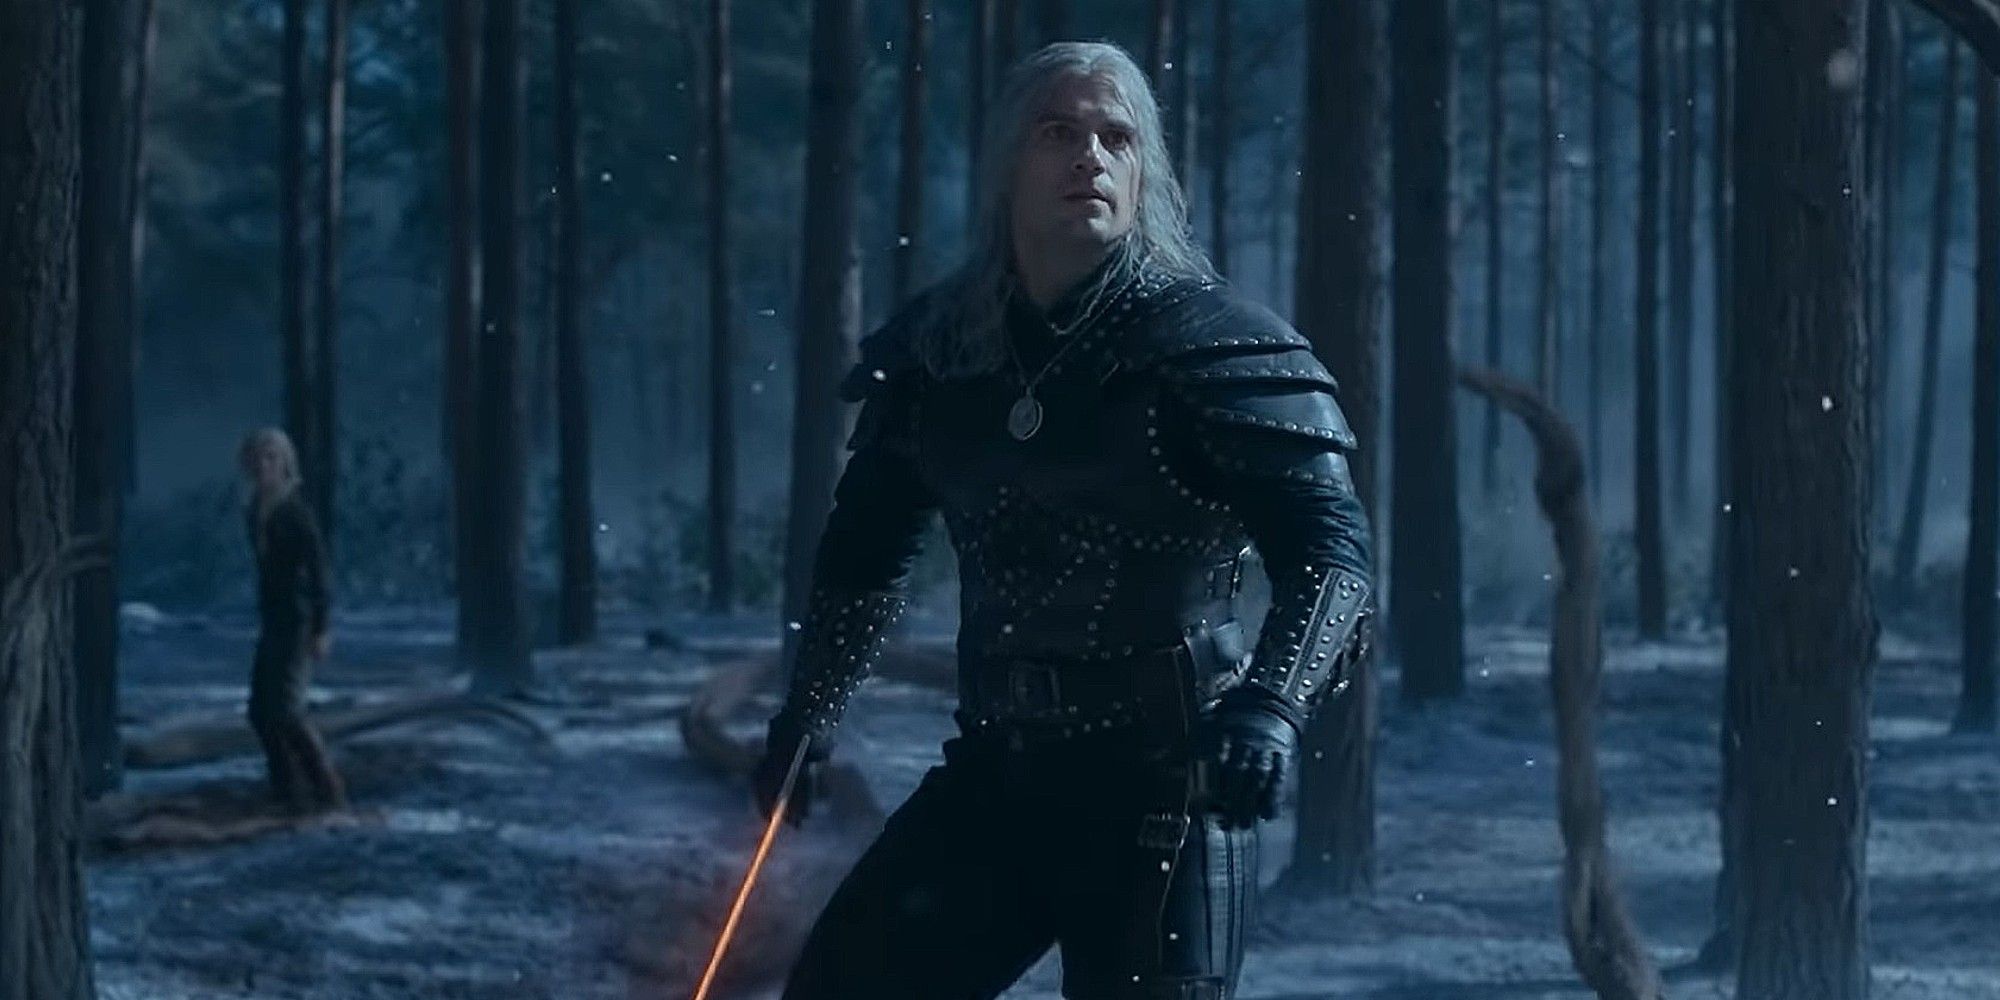 The Witcher' Season 2 Joins Netflix's Most-Viewed TV of All Time